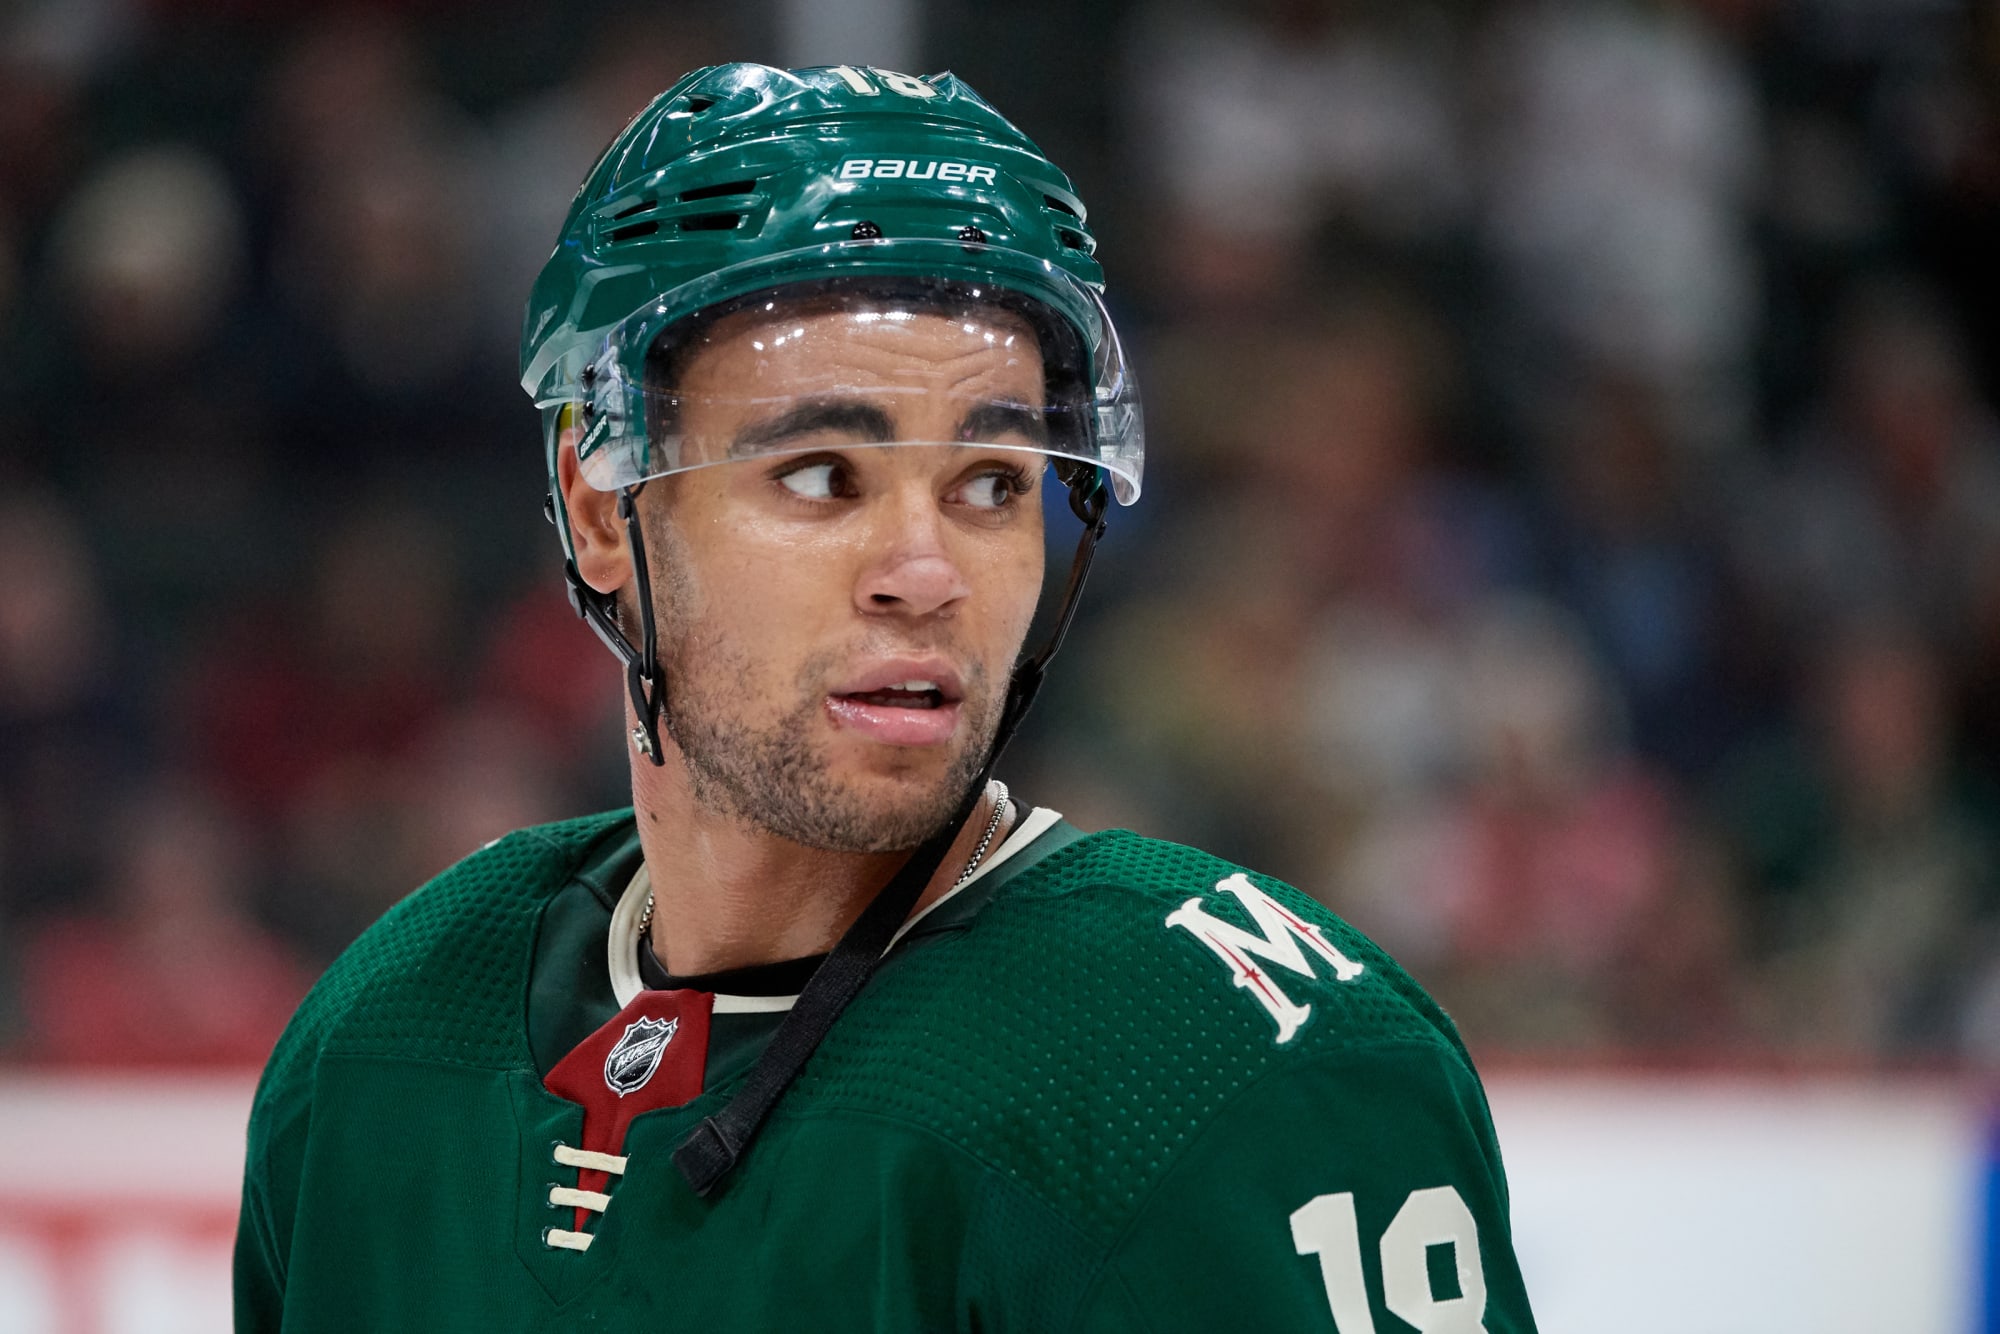 Jordan Greenway, 'The Big Rig', is Back and What the Wild Need